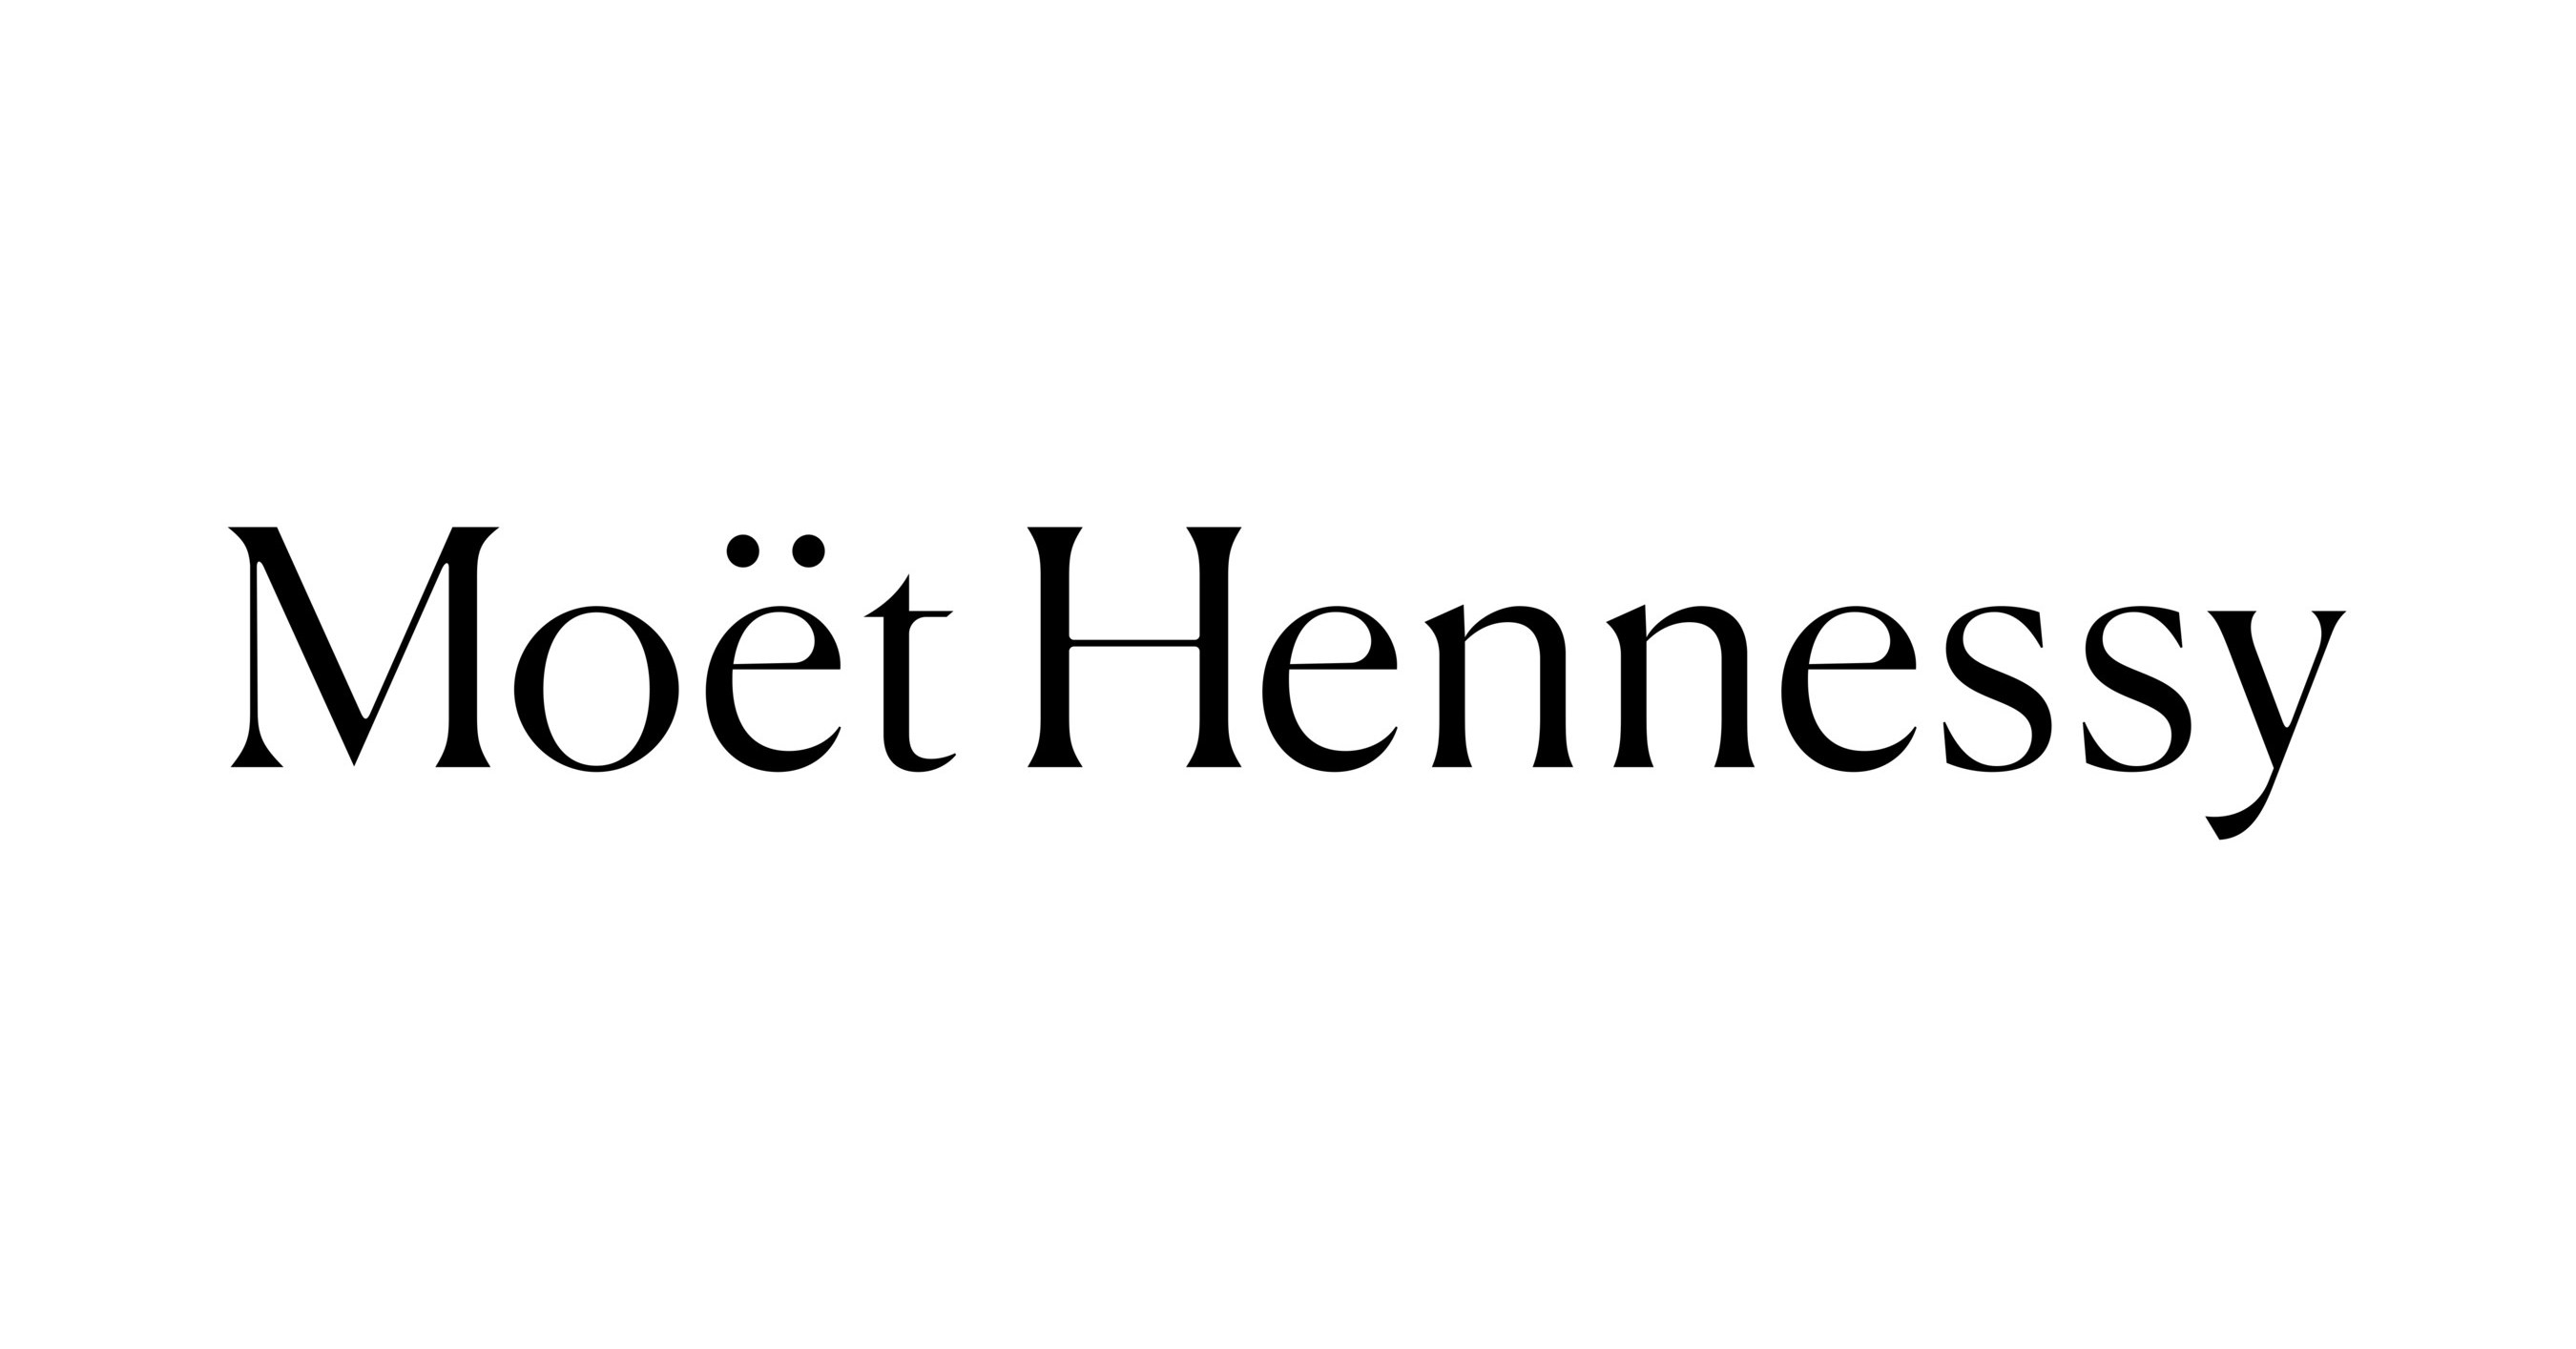 Our Exclusive Interview with Moët Hennessy Spain Managing Director Manuel  Reman